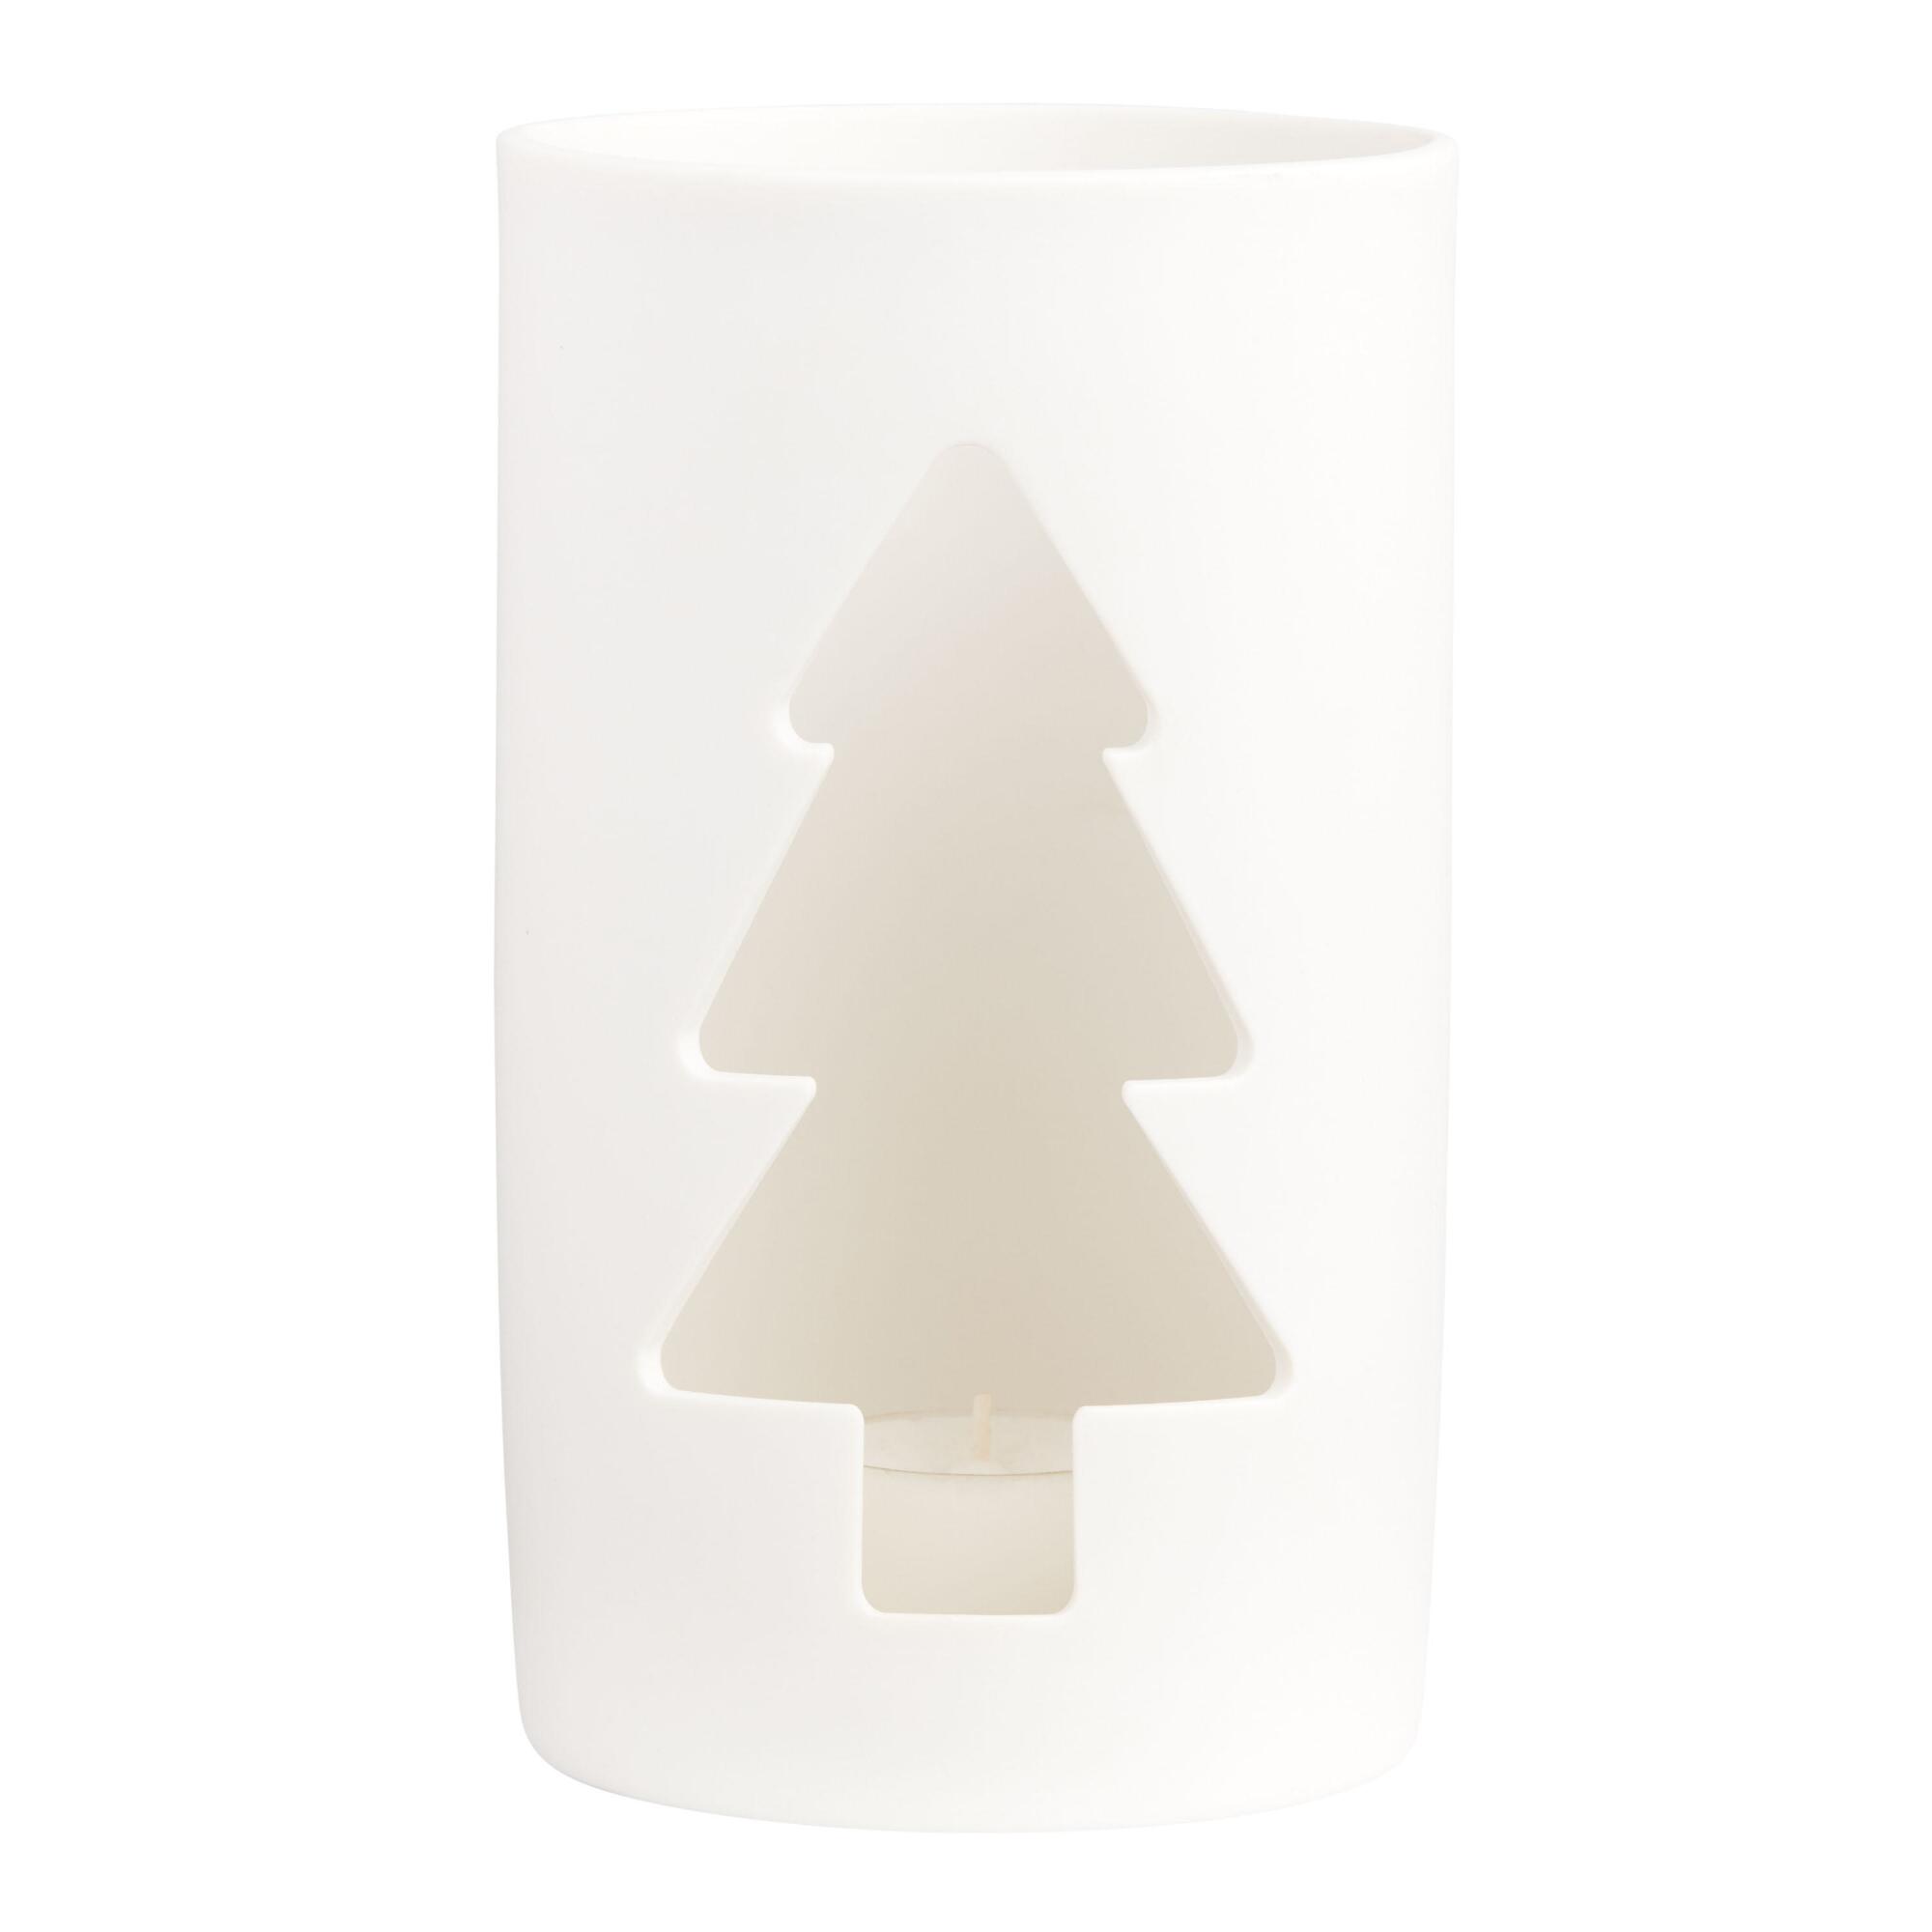 Tree Silhouette Ceramic Hurricane Candle Holder: White by World Market